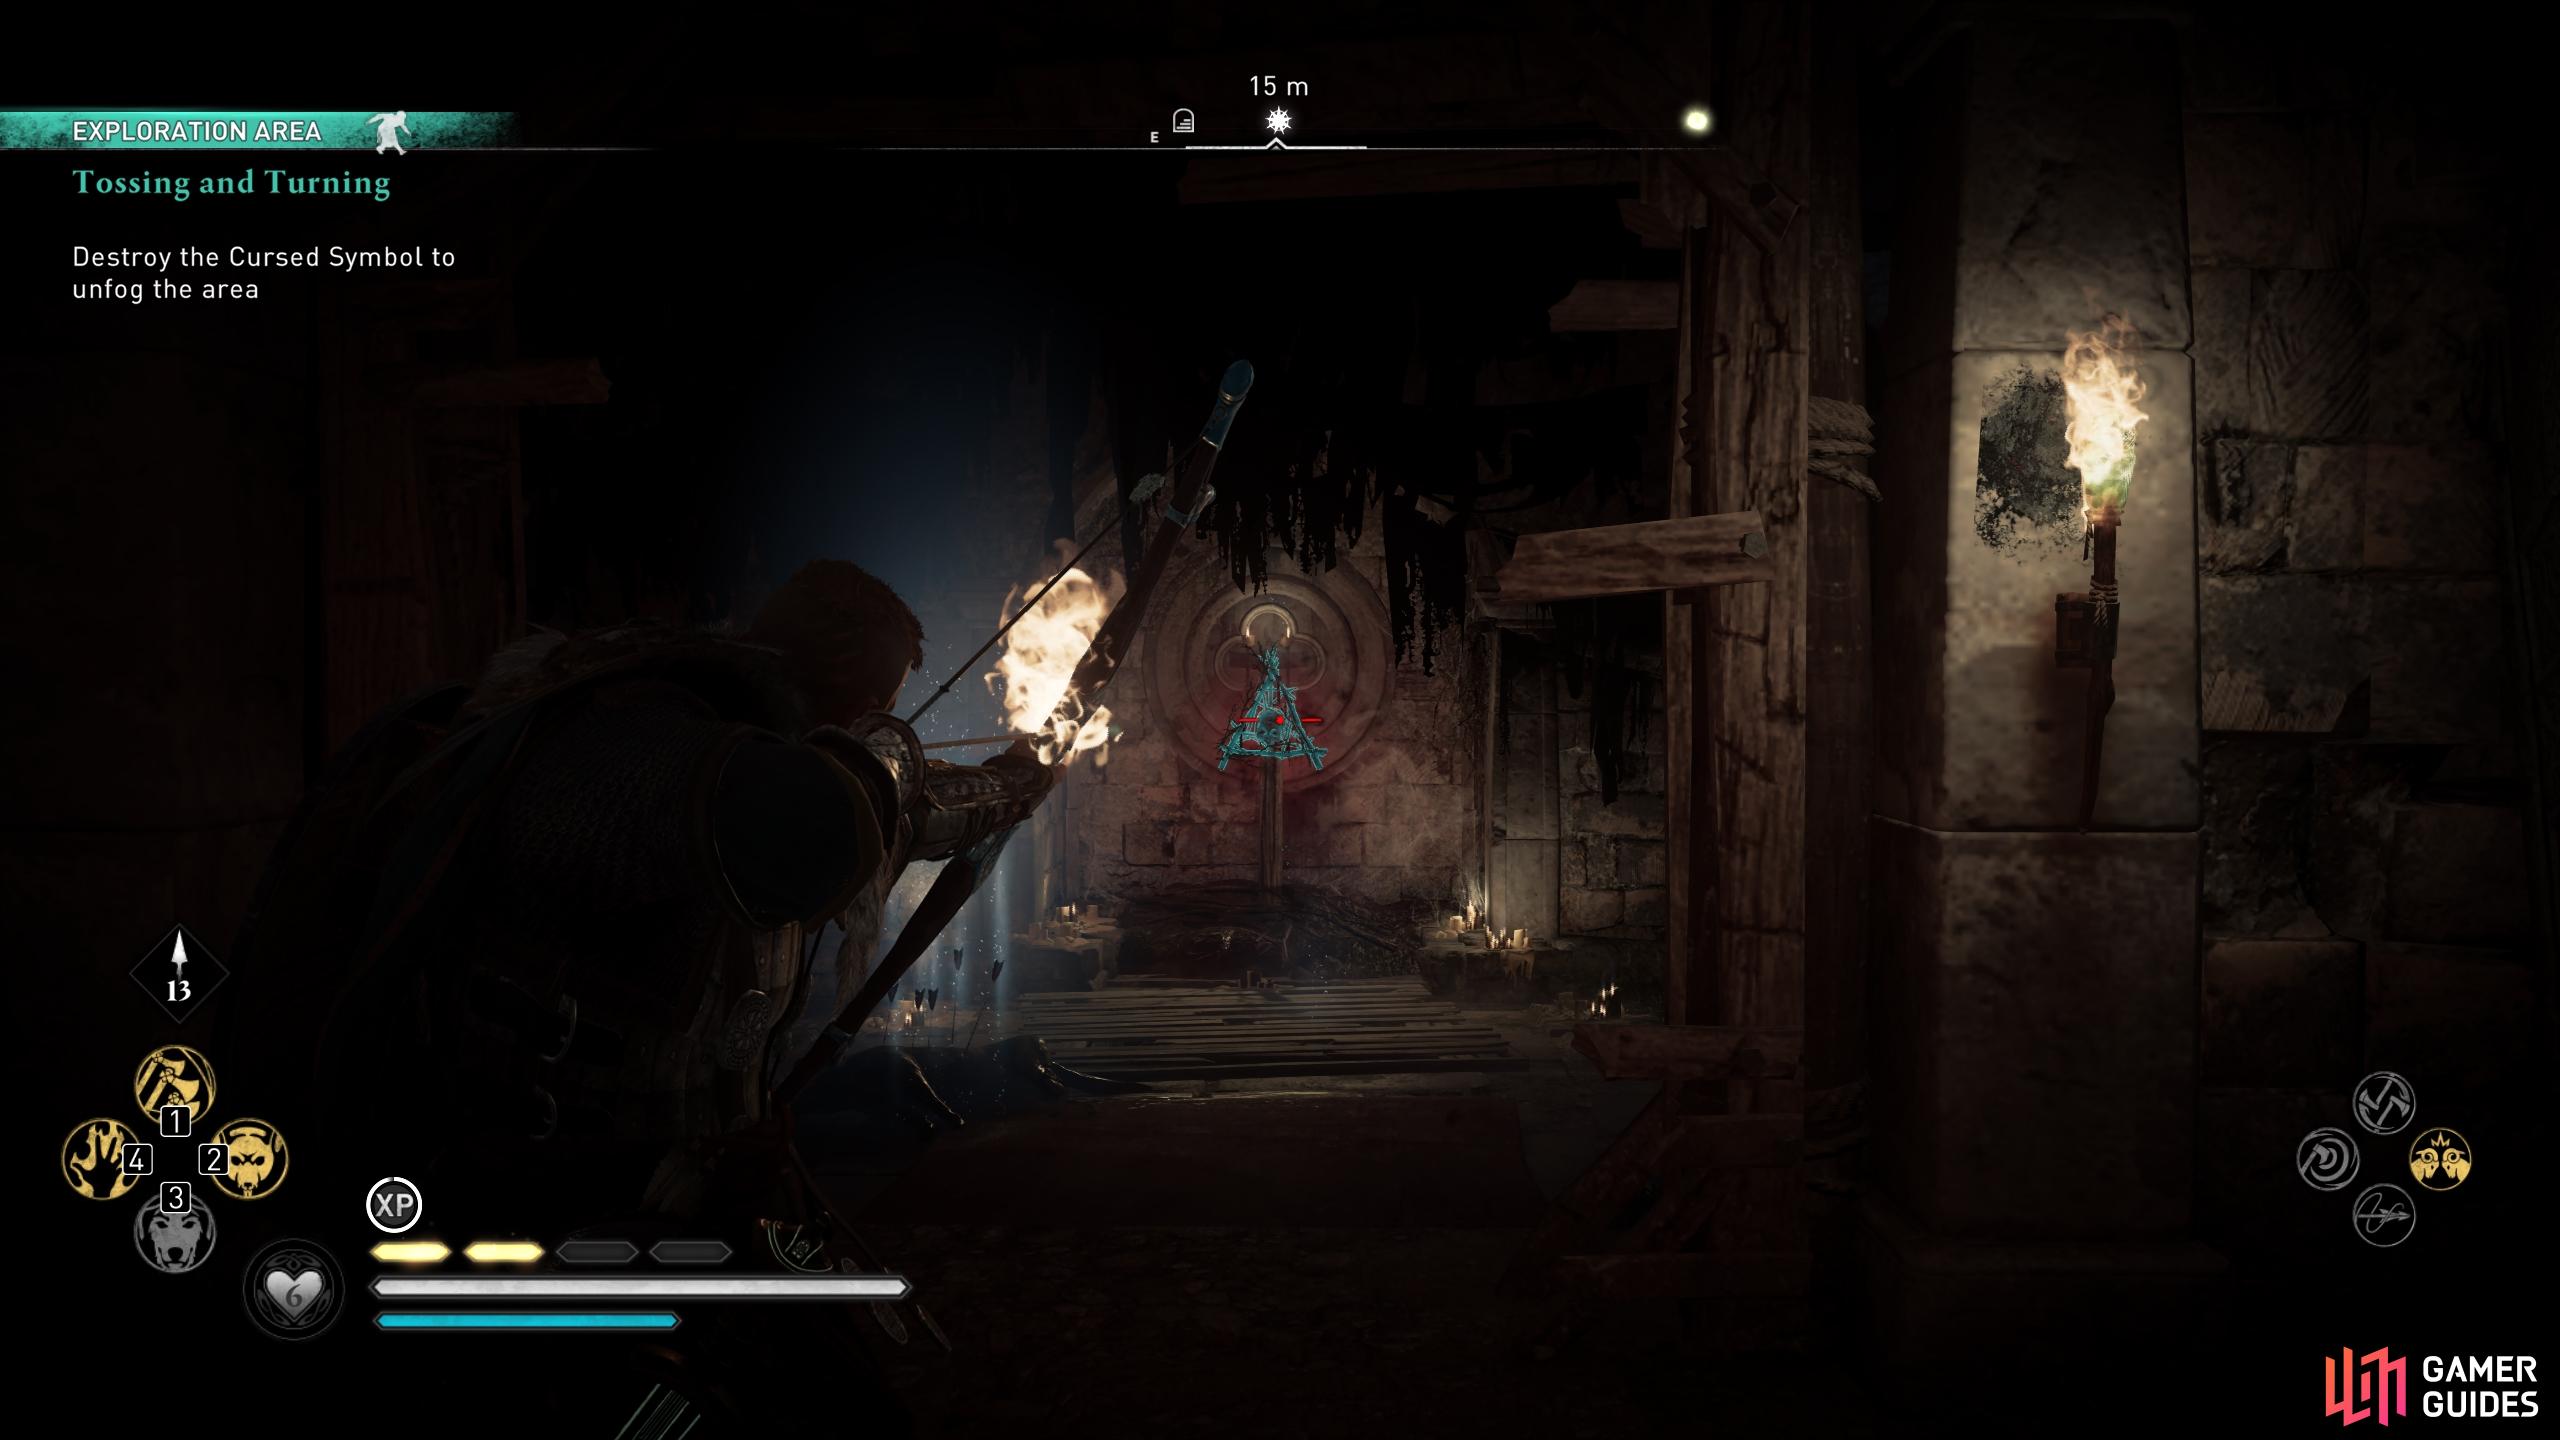 The cursed symbol can be found behind a second barricade within the crypt.